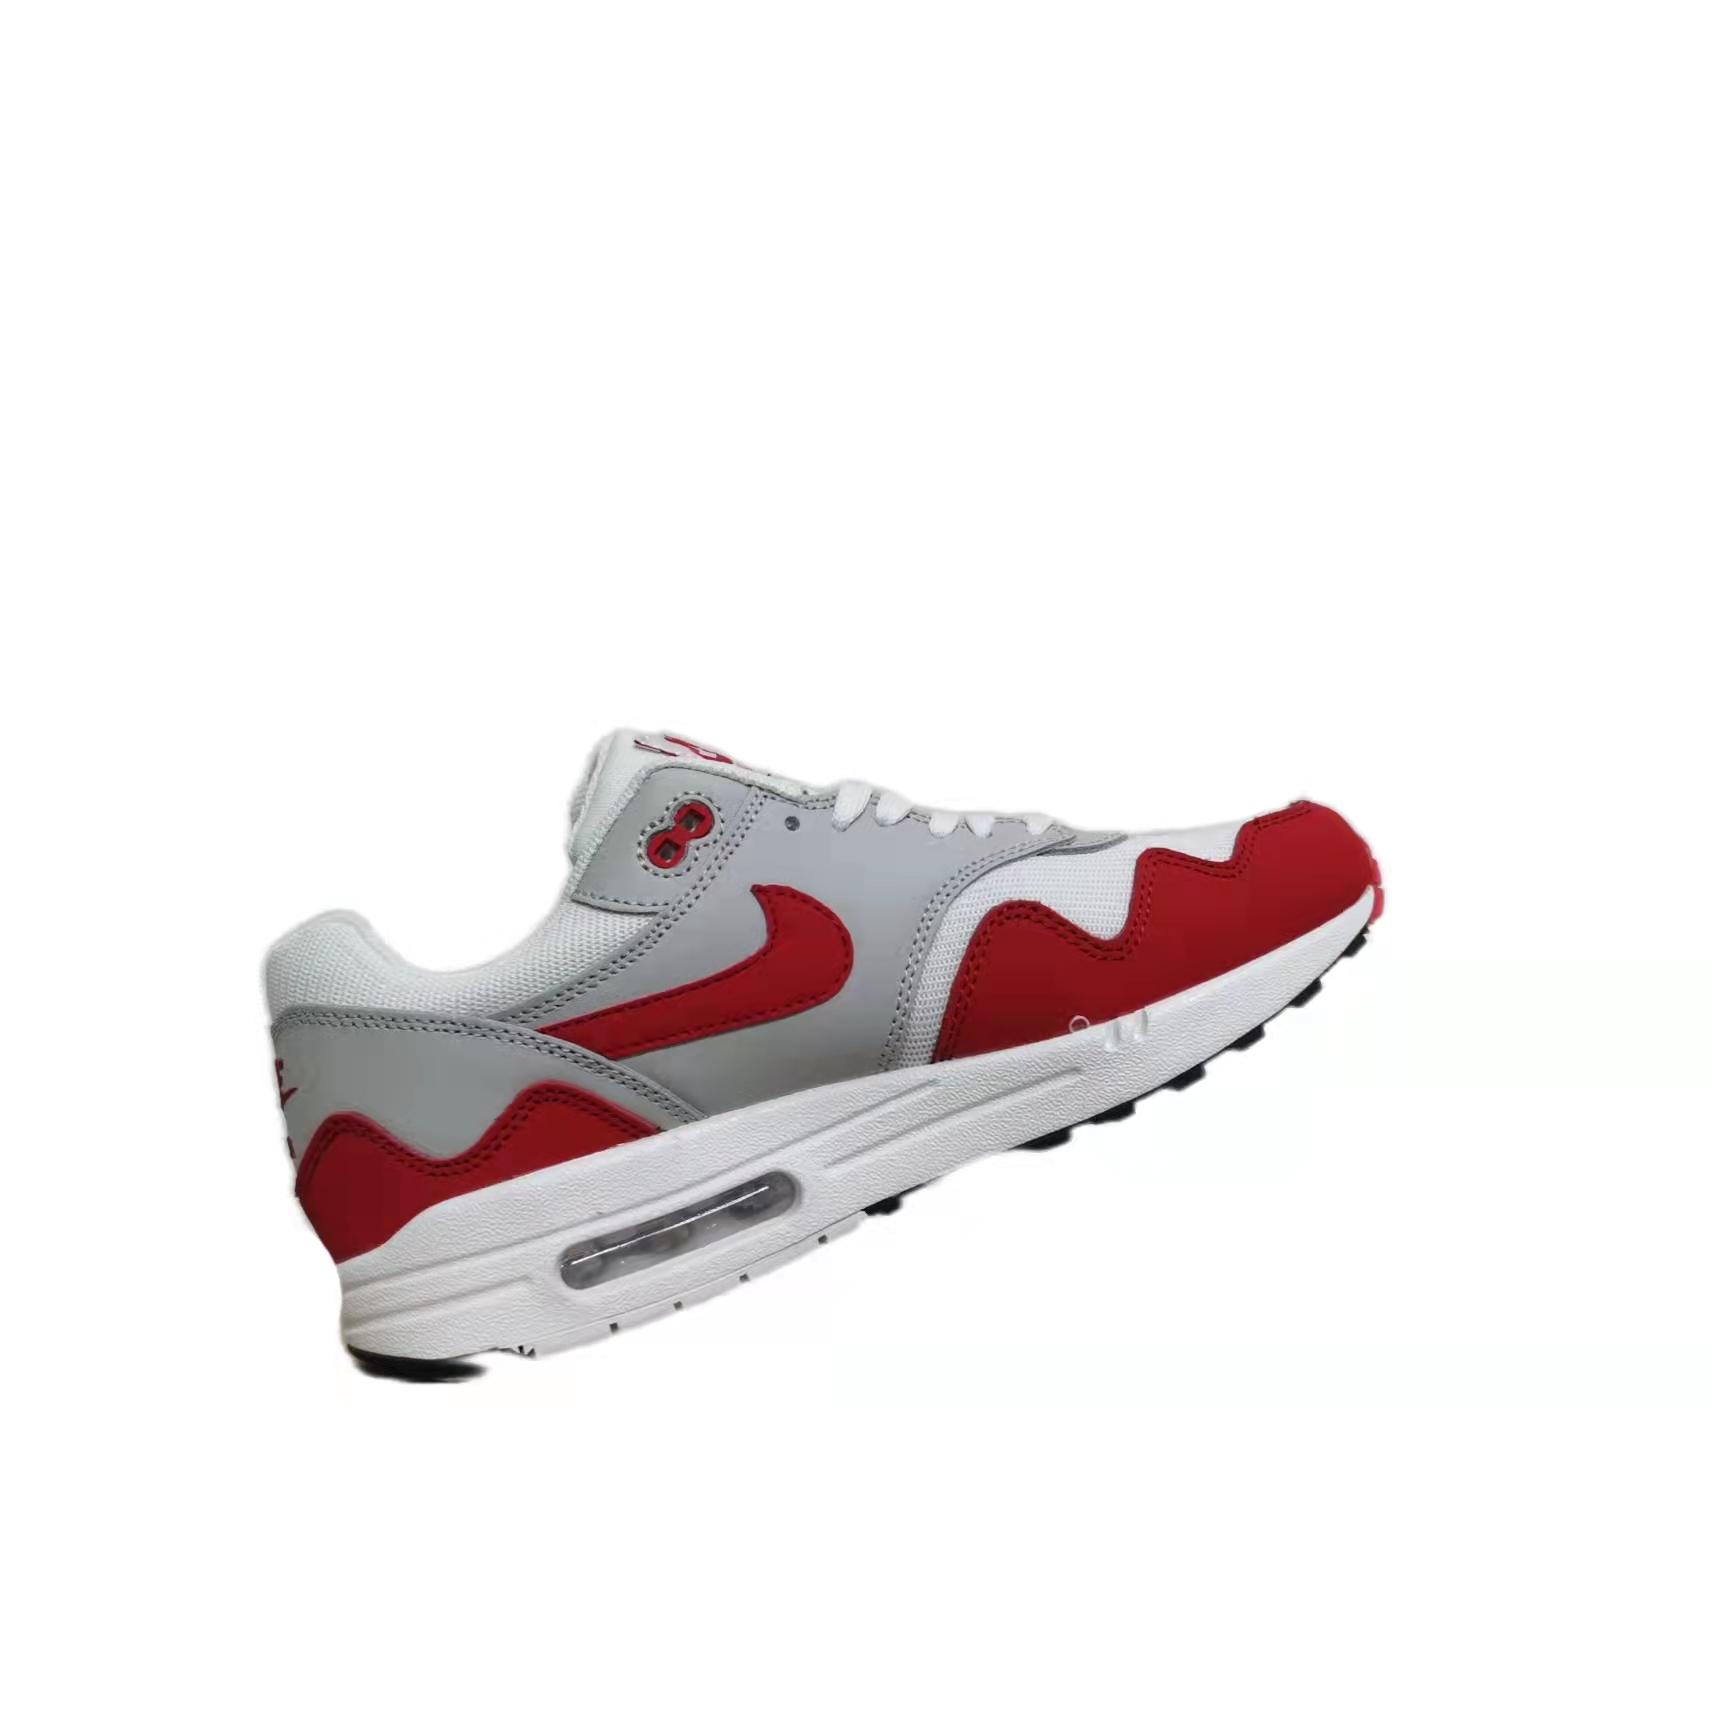 New Nike Air Max 87 Grey Red White Shoes